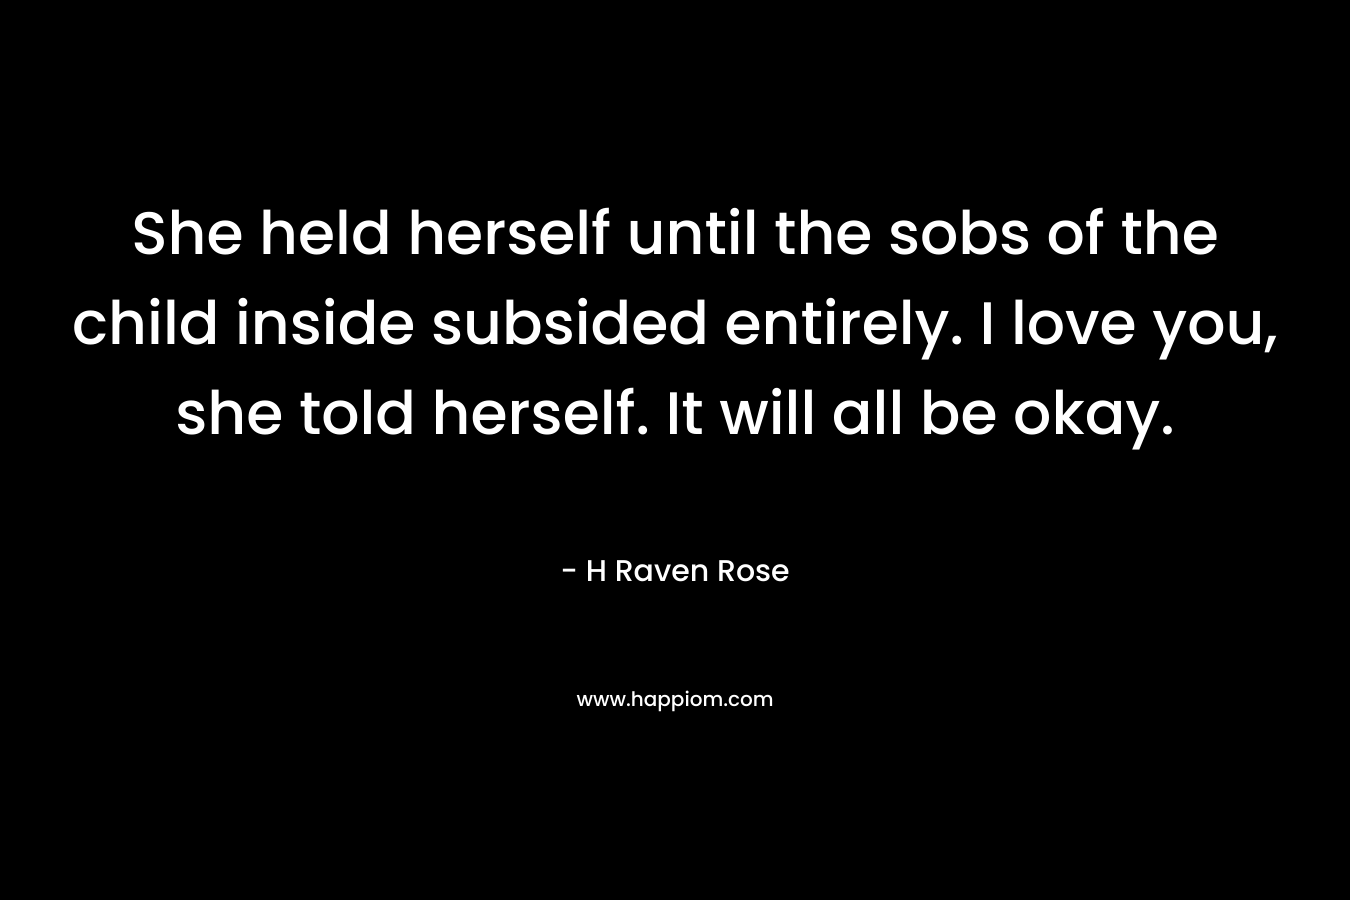 She held herself until the sobs of the child inside subsided entirely. I love you, she told herself. It will all be okay.